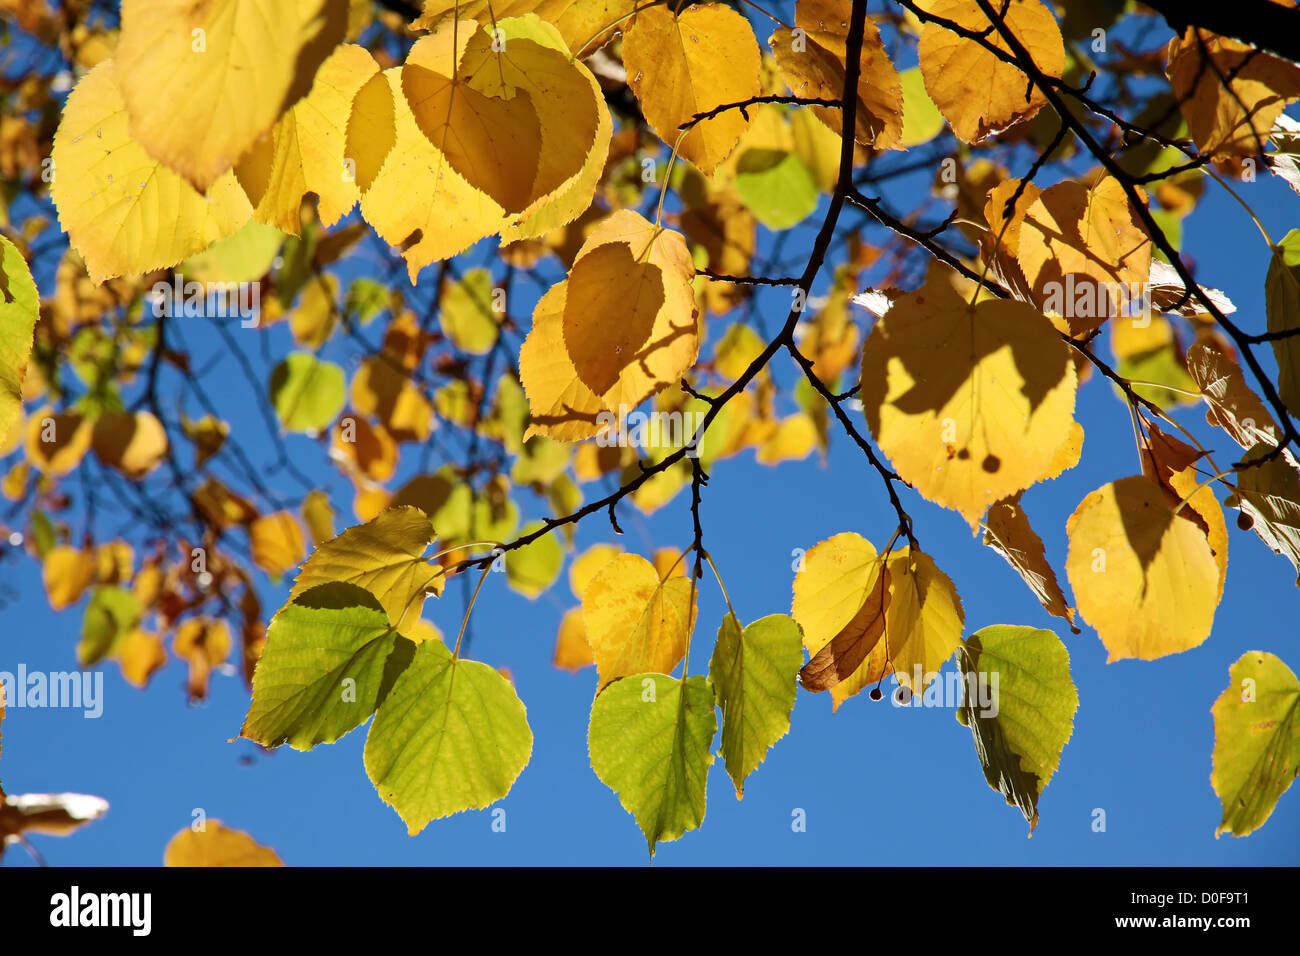 Yellow autumn leaves of the linden tree with blue sky Stock Photo